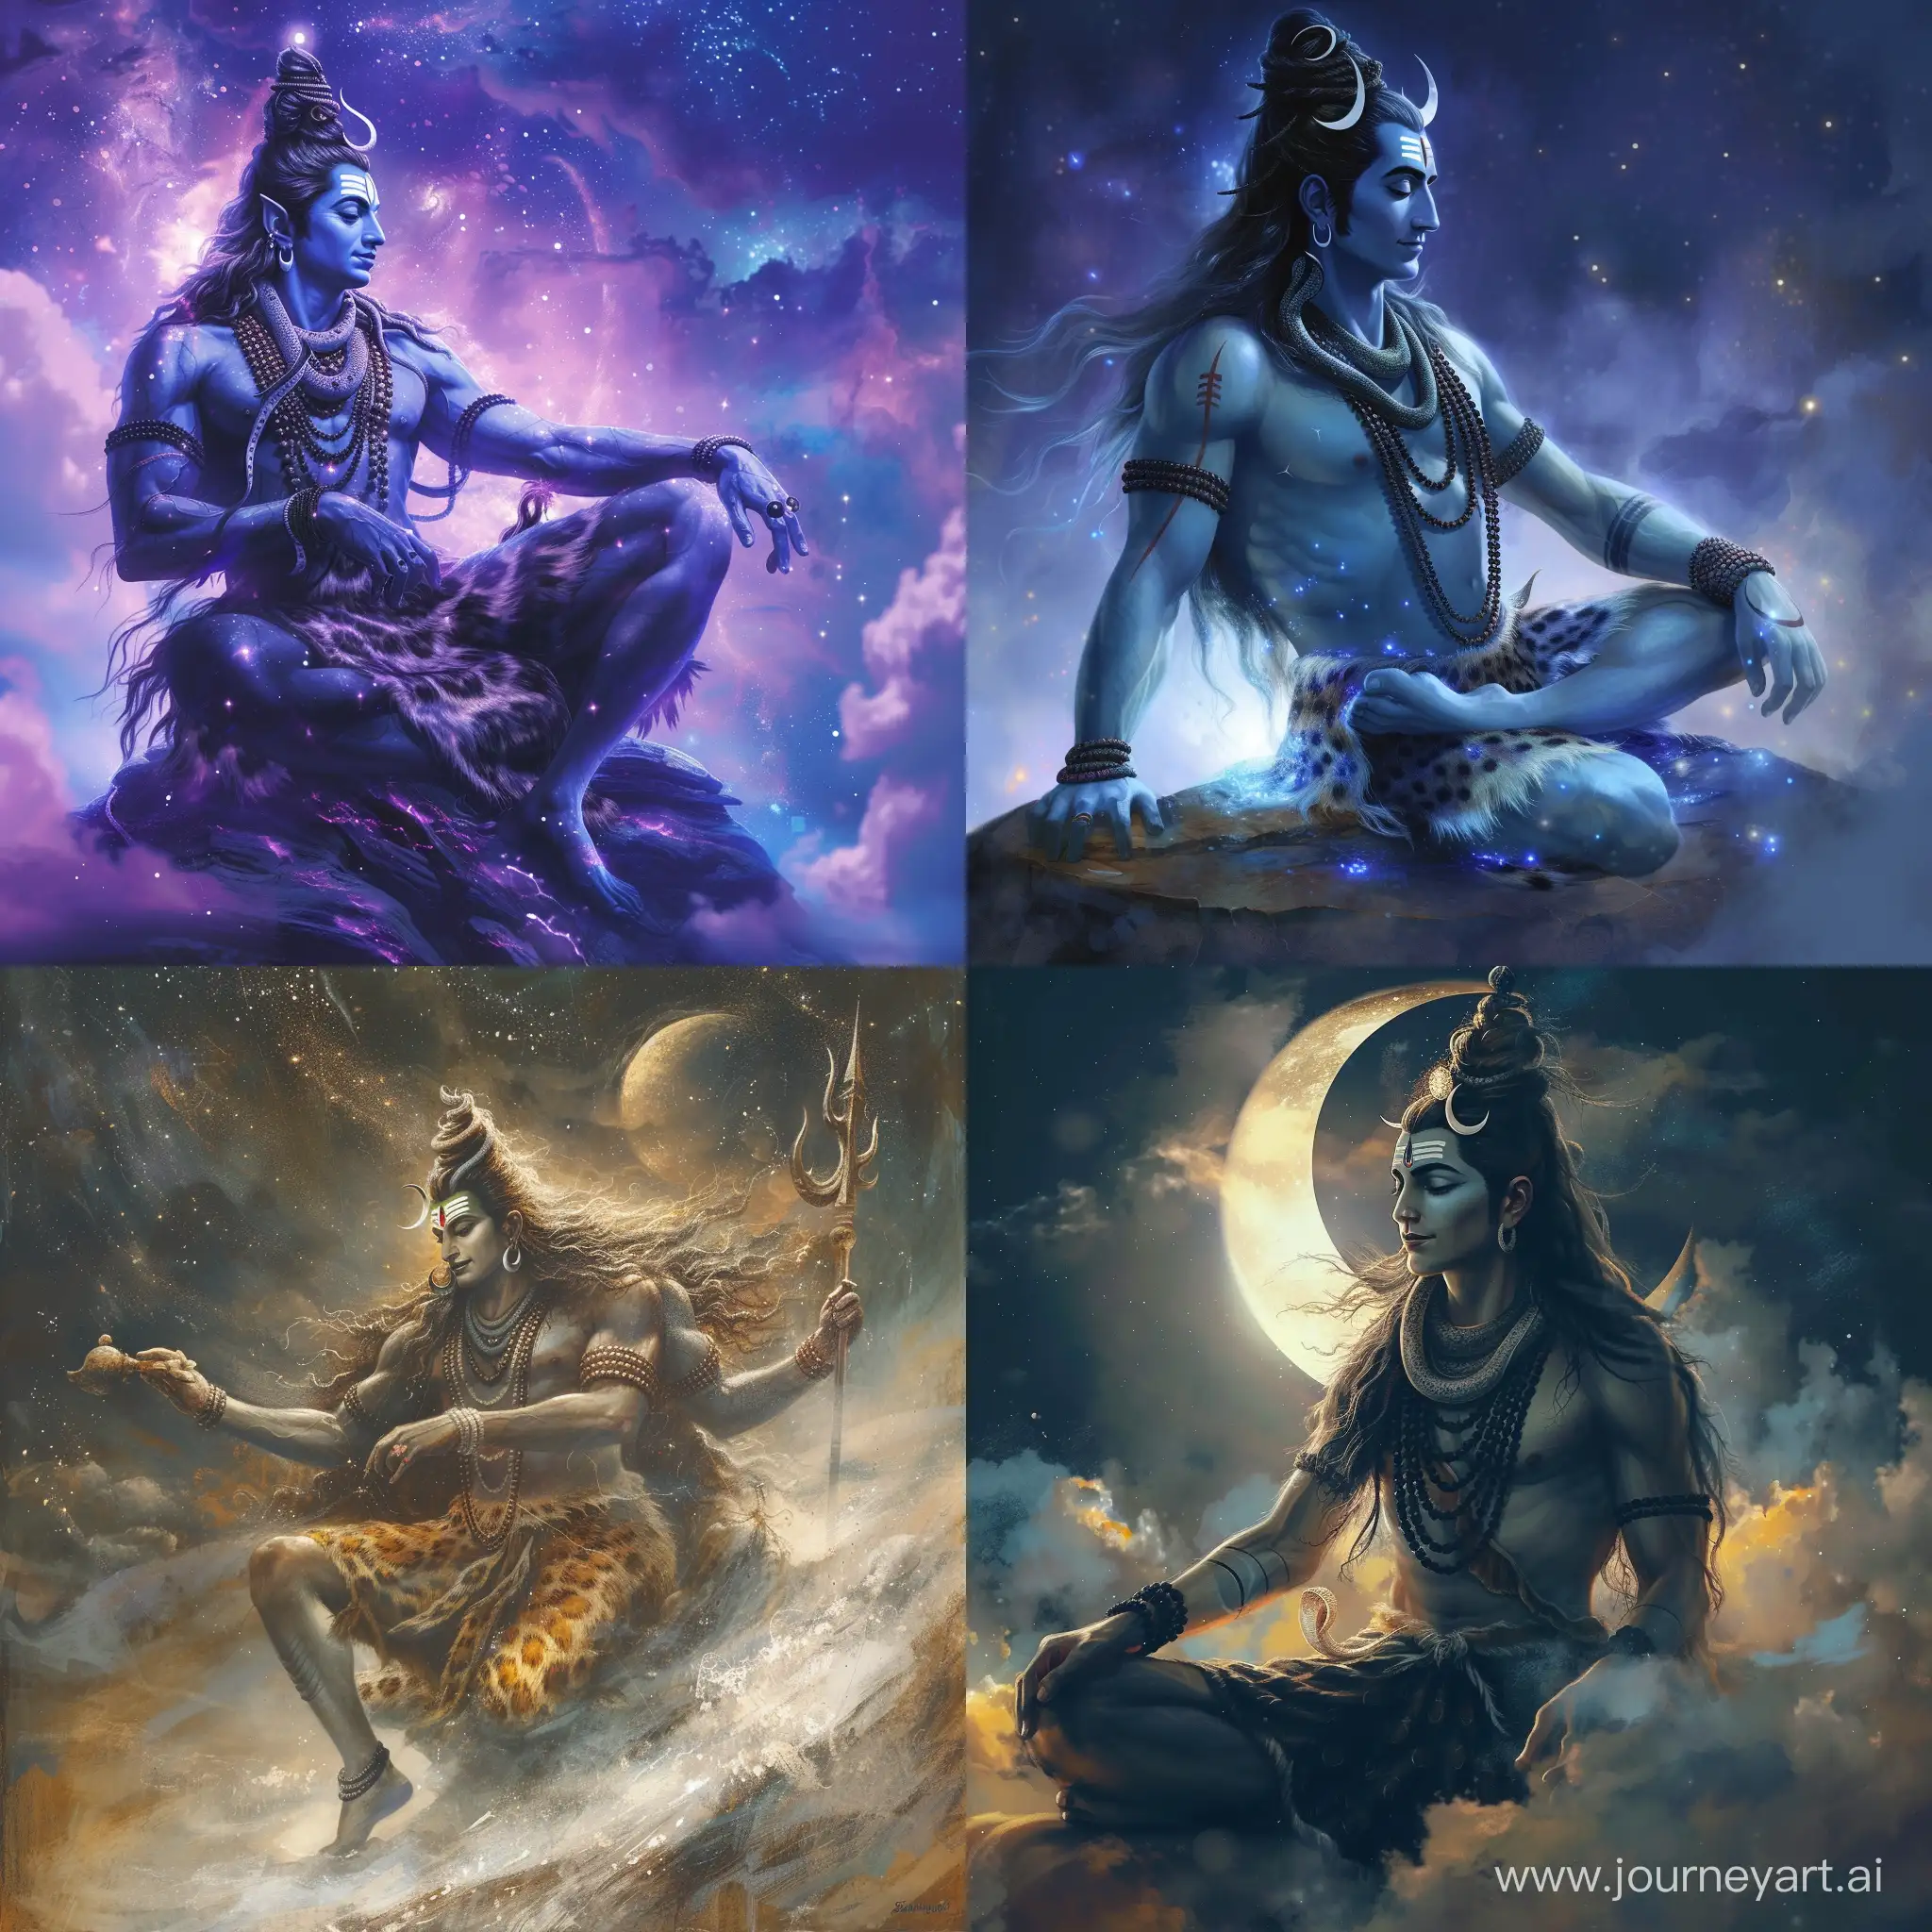 Mystical-Creation-Lord-Shiva-Sculpting-the-Universe